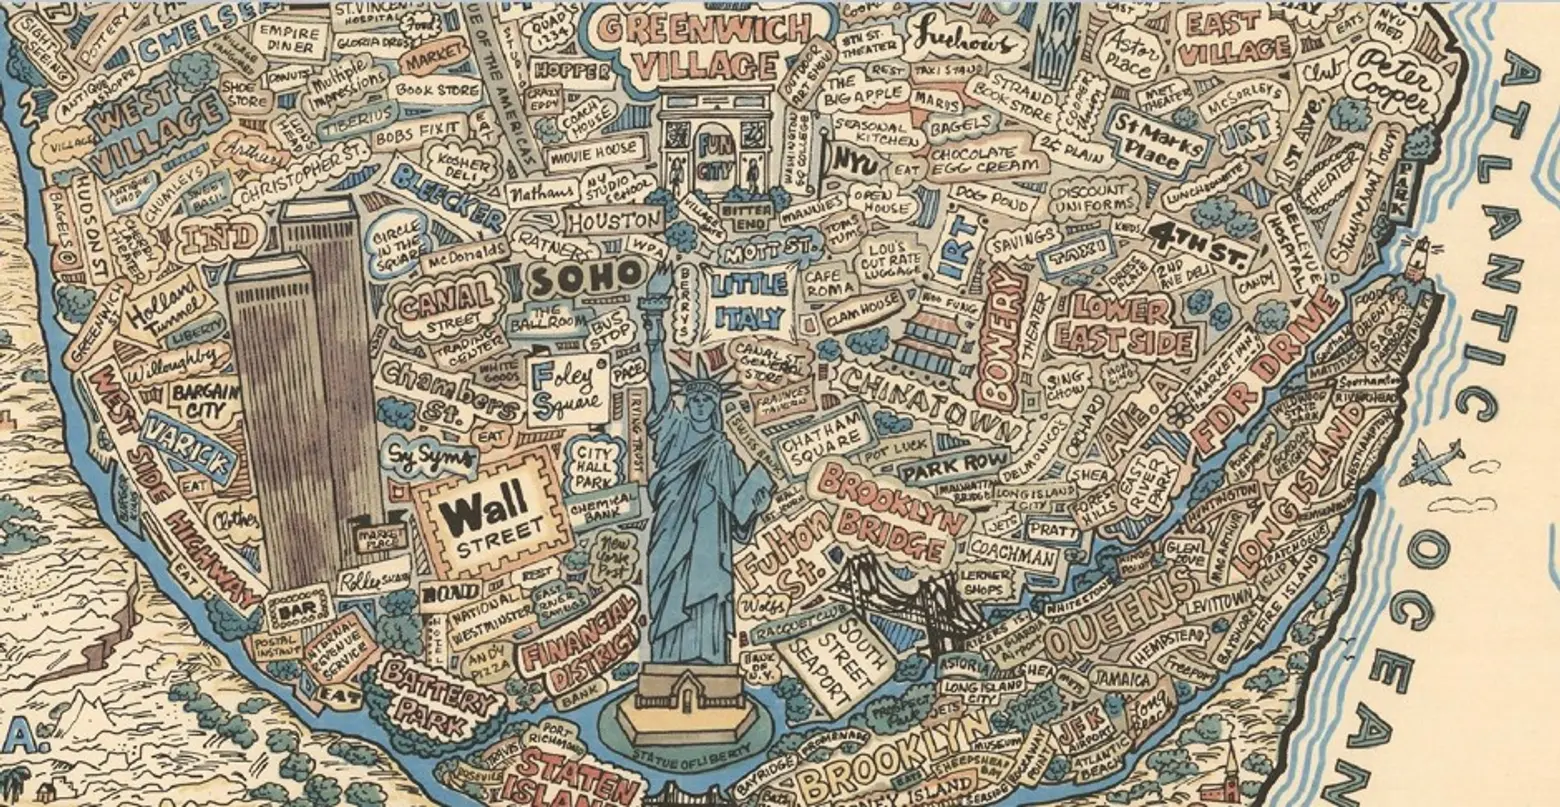 nyc worldview, nyc as center of the world, greatest city on earth, map of nyc